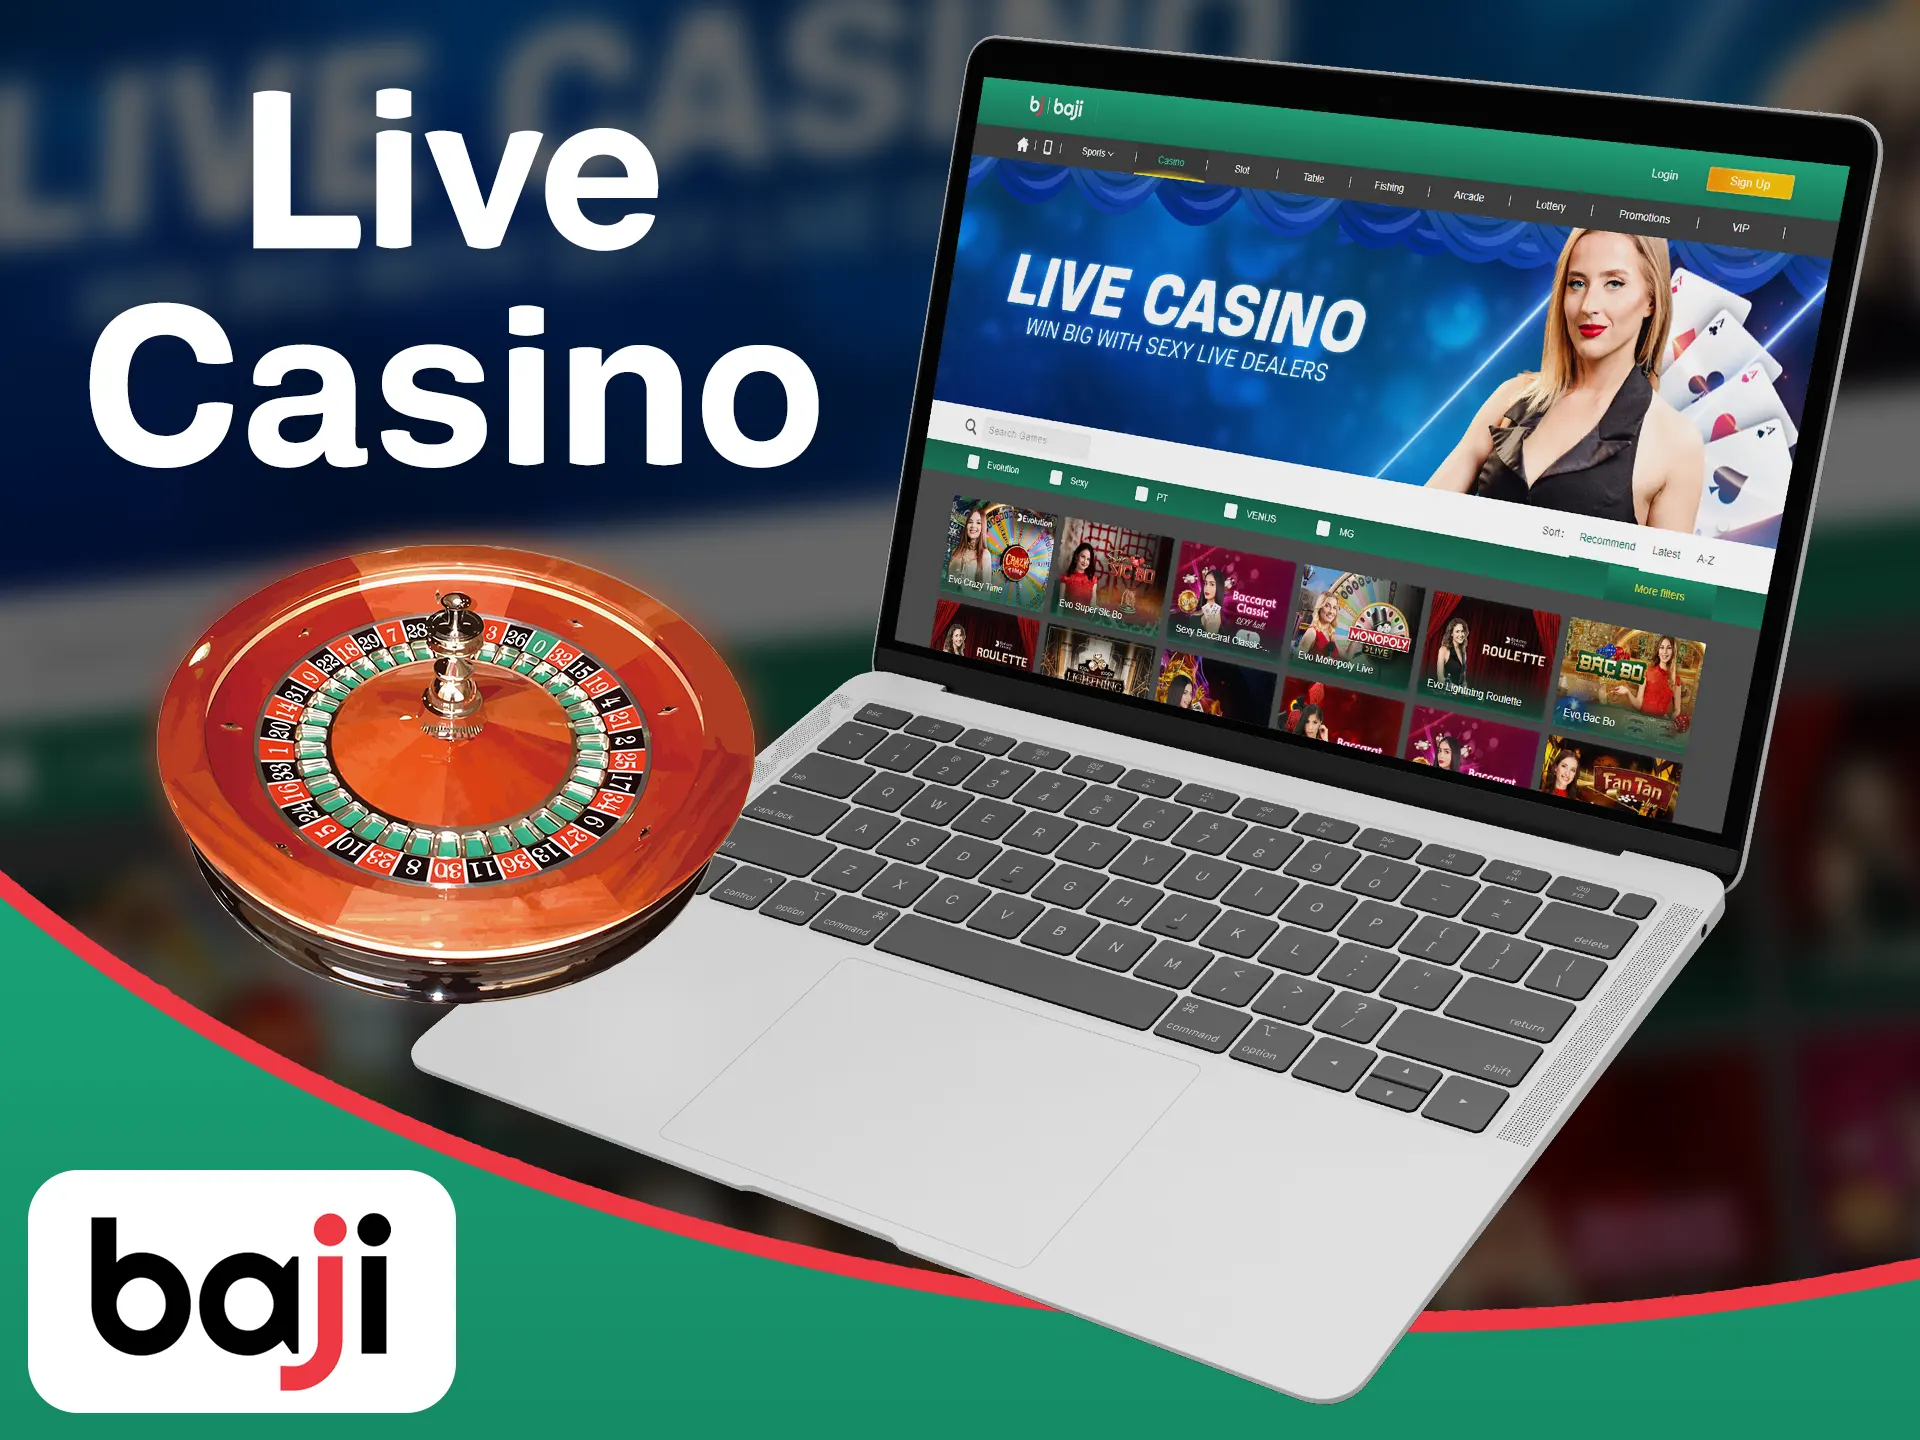 Play casino games with real people in Baji live casino.